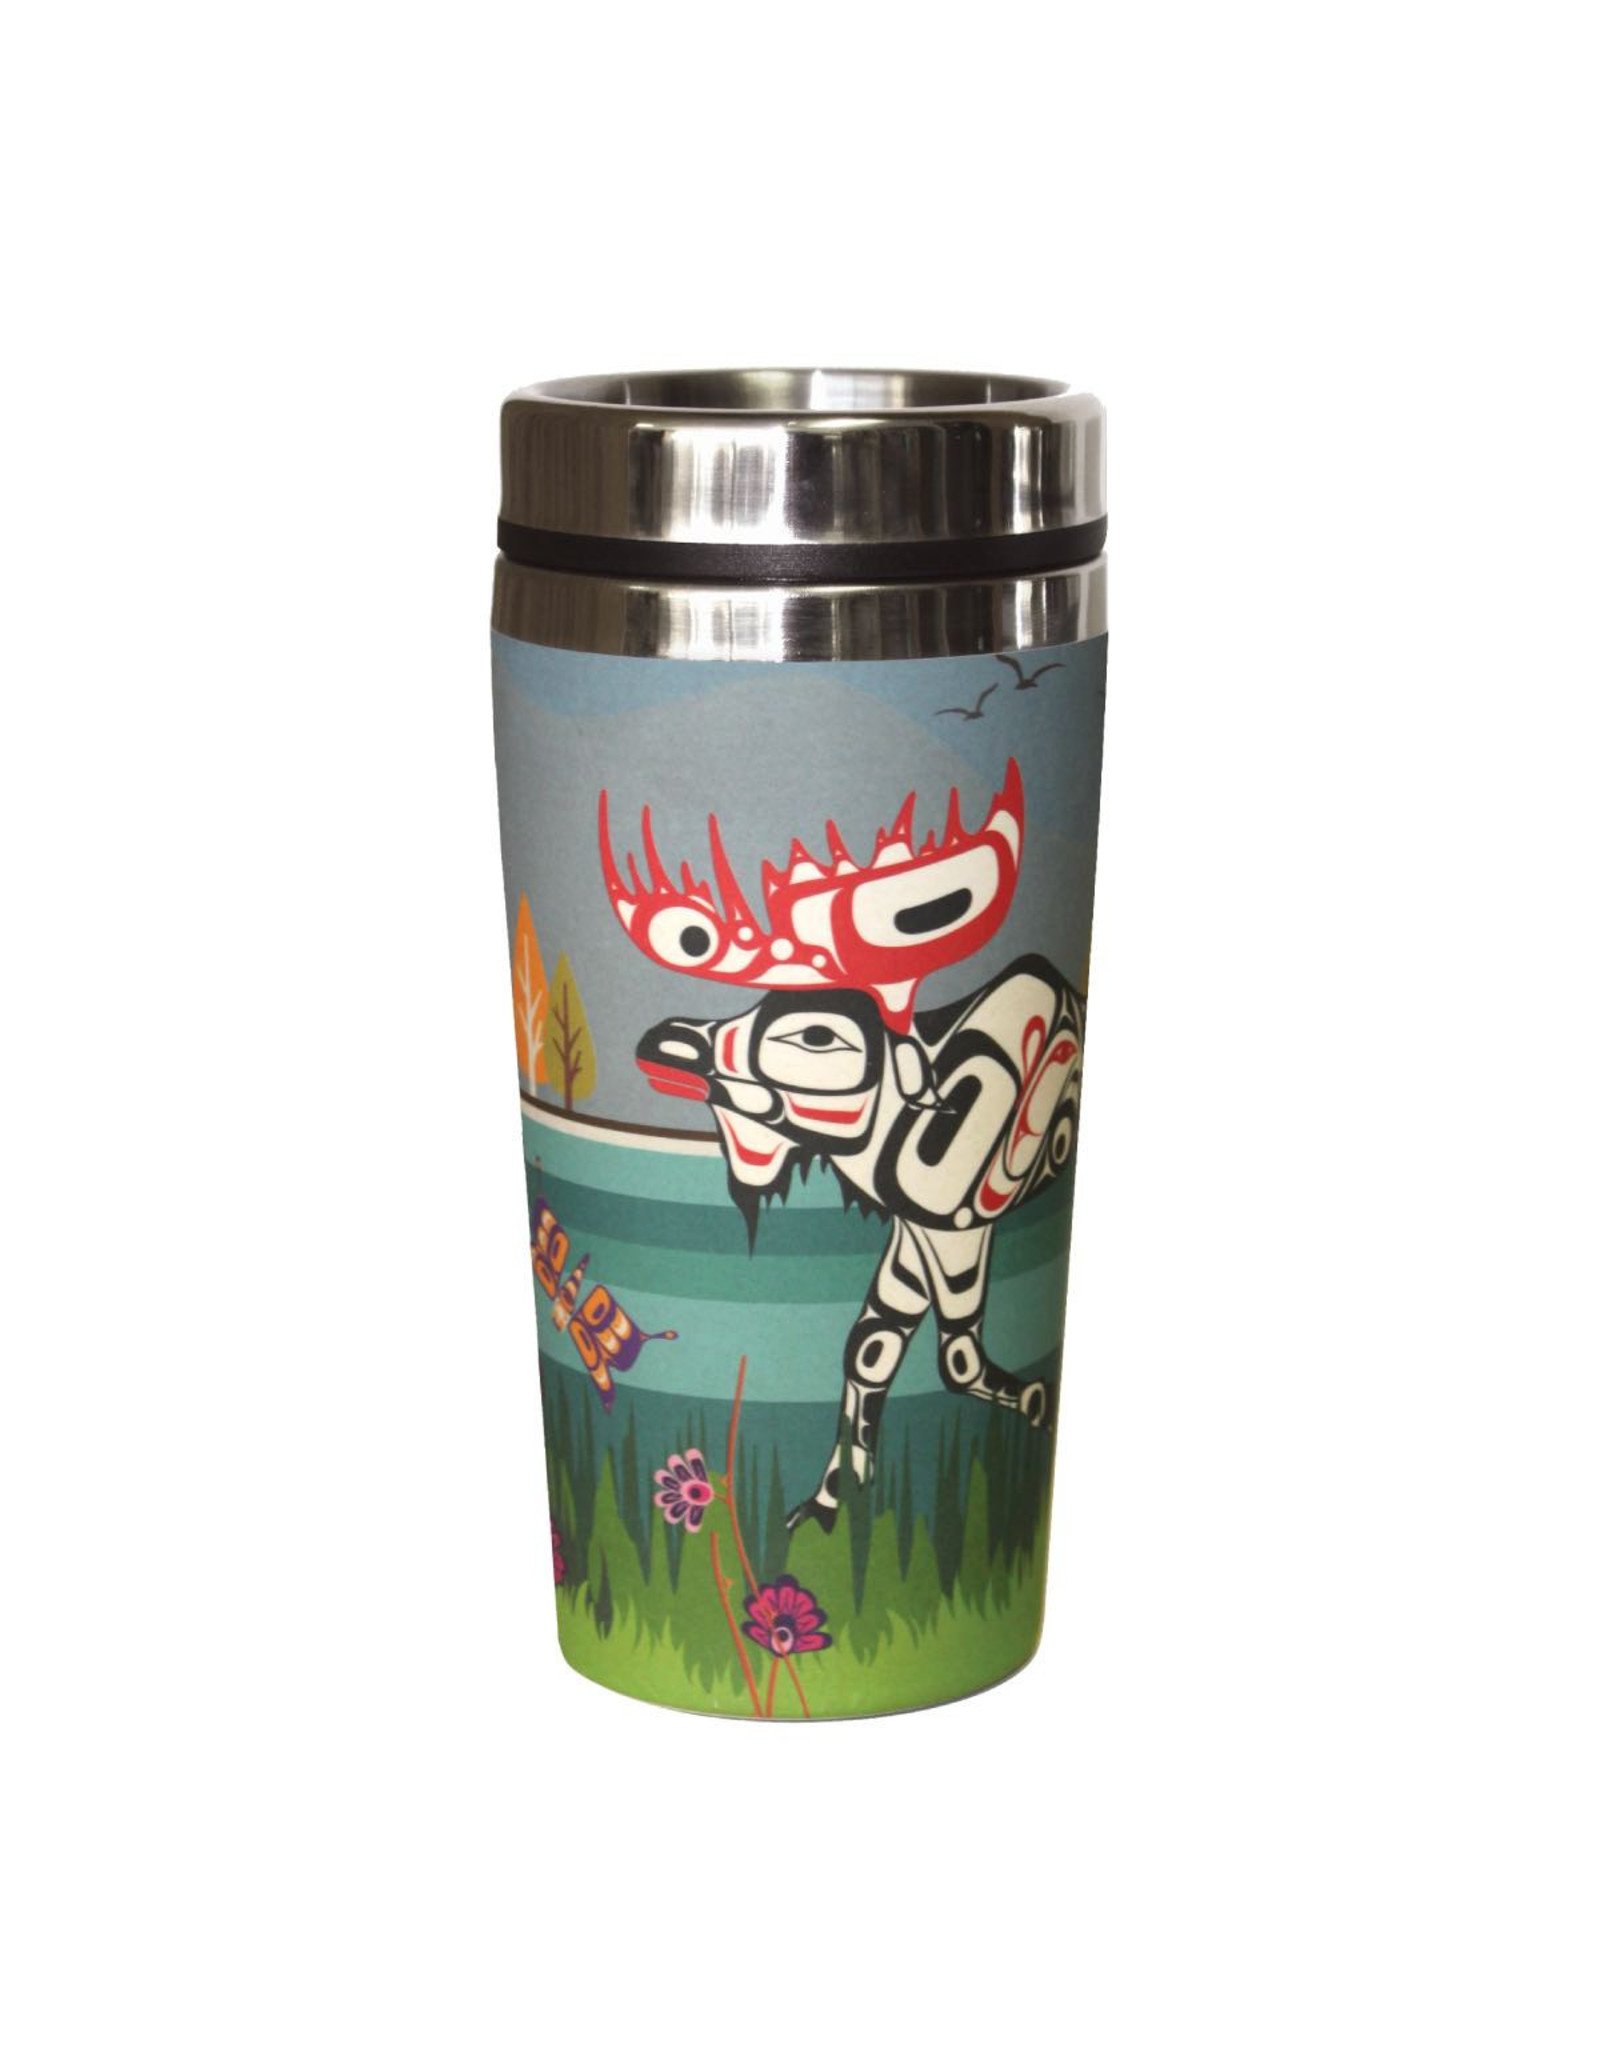 Bamboo Travel Mug - Moose by Terry Starr